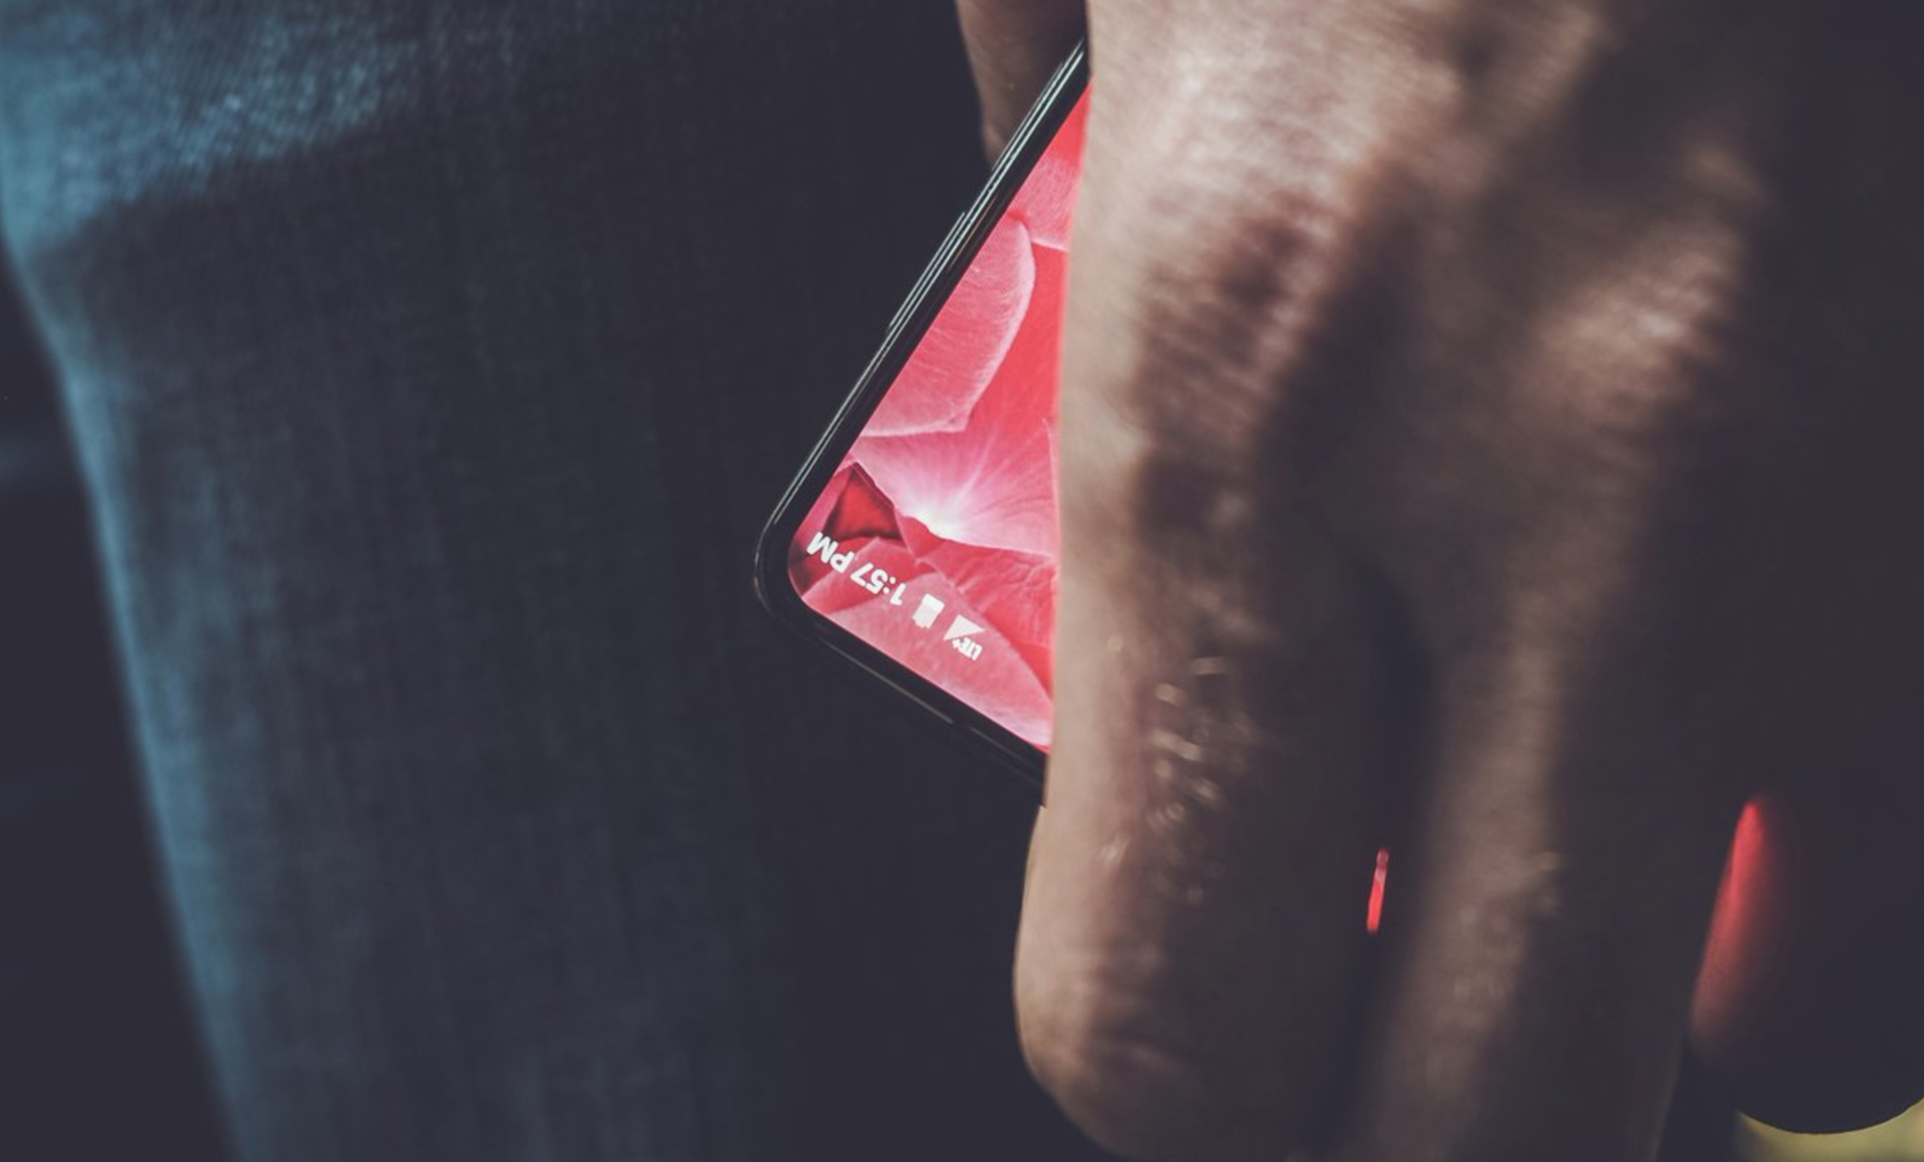 Image result for andy rubin tweeted teaser pic of phone in march 27